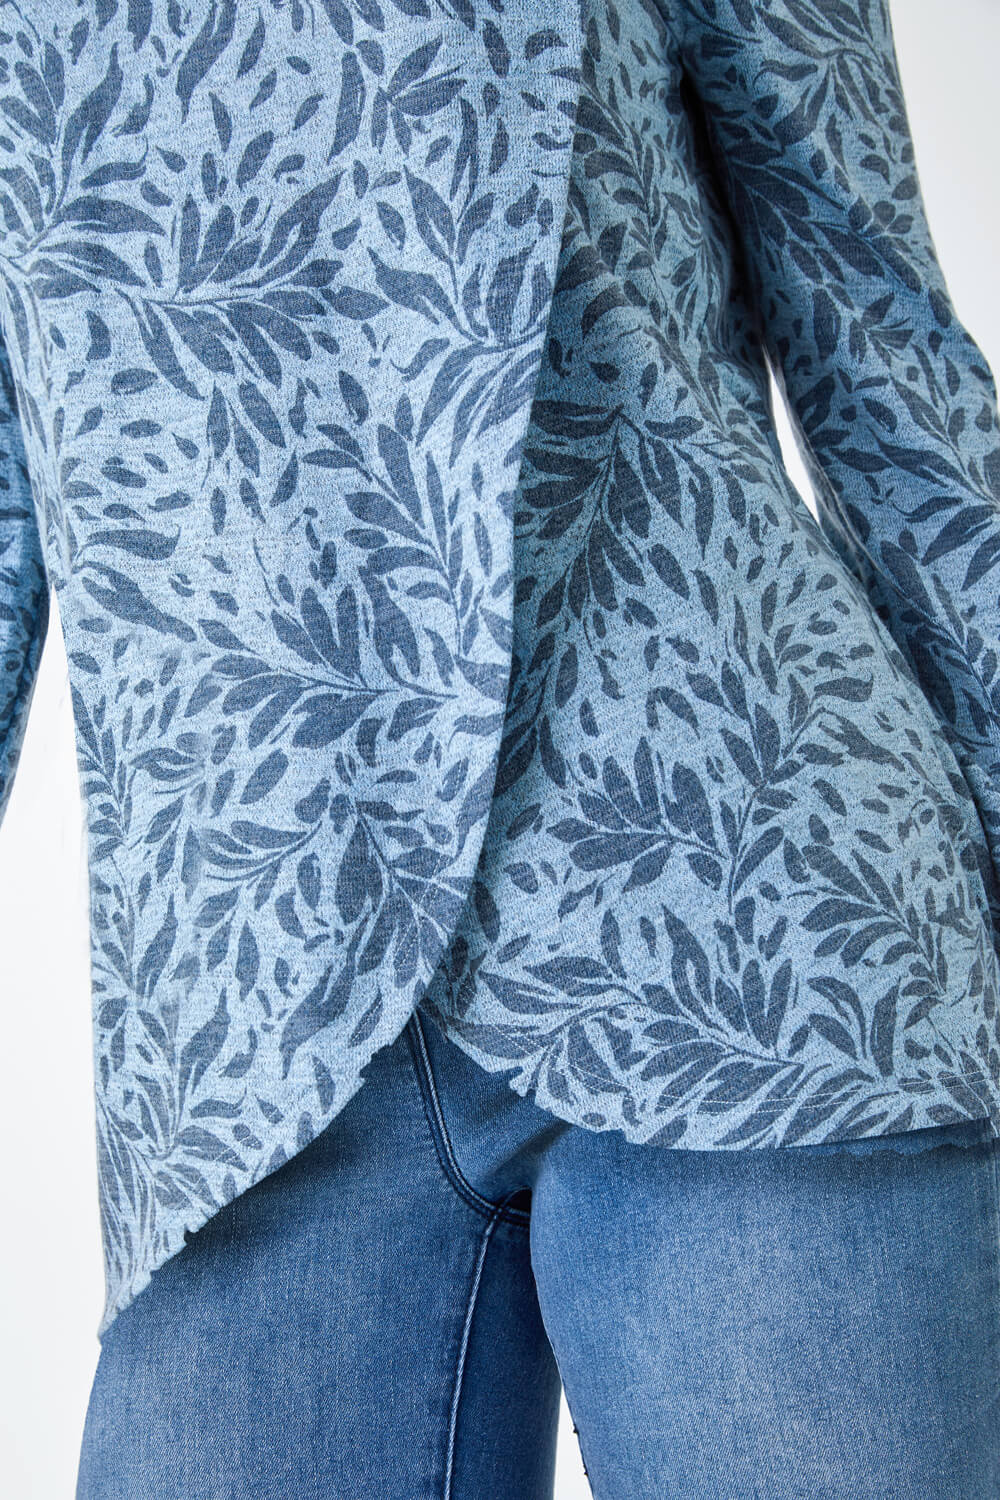 Blue Floral Print Cowl Neck Stretch Top , Image 5 of 5